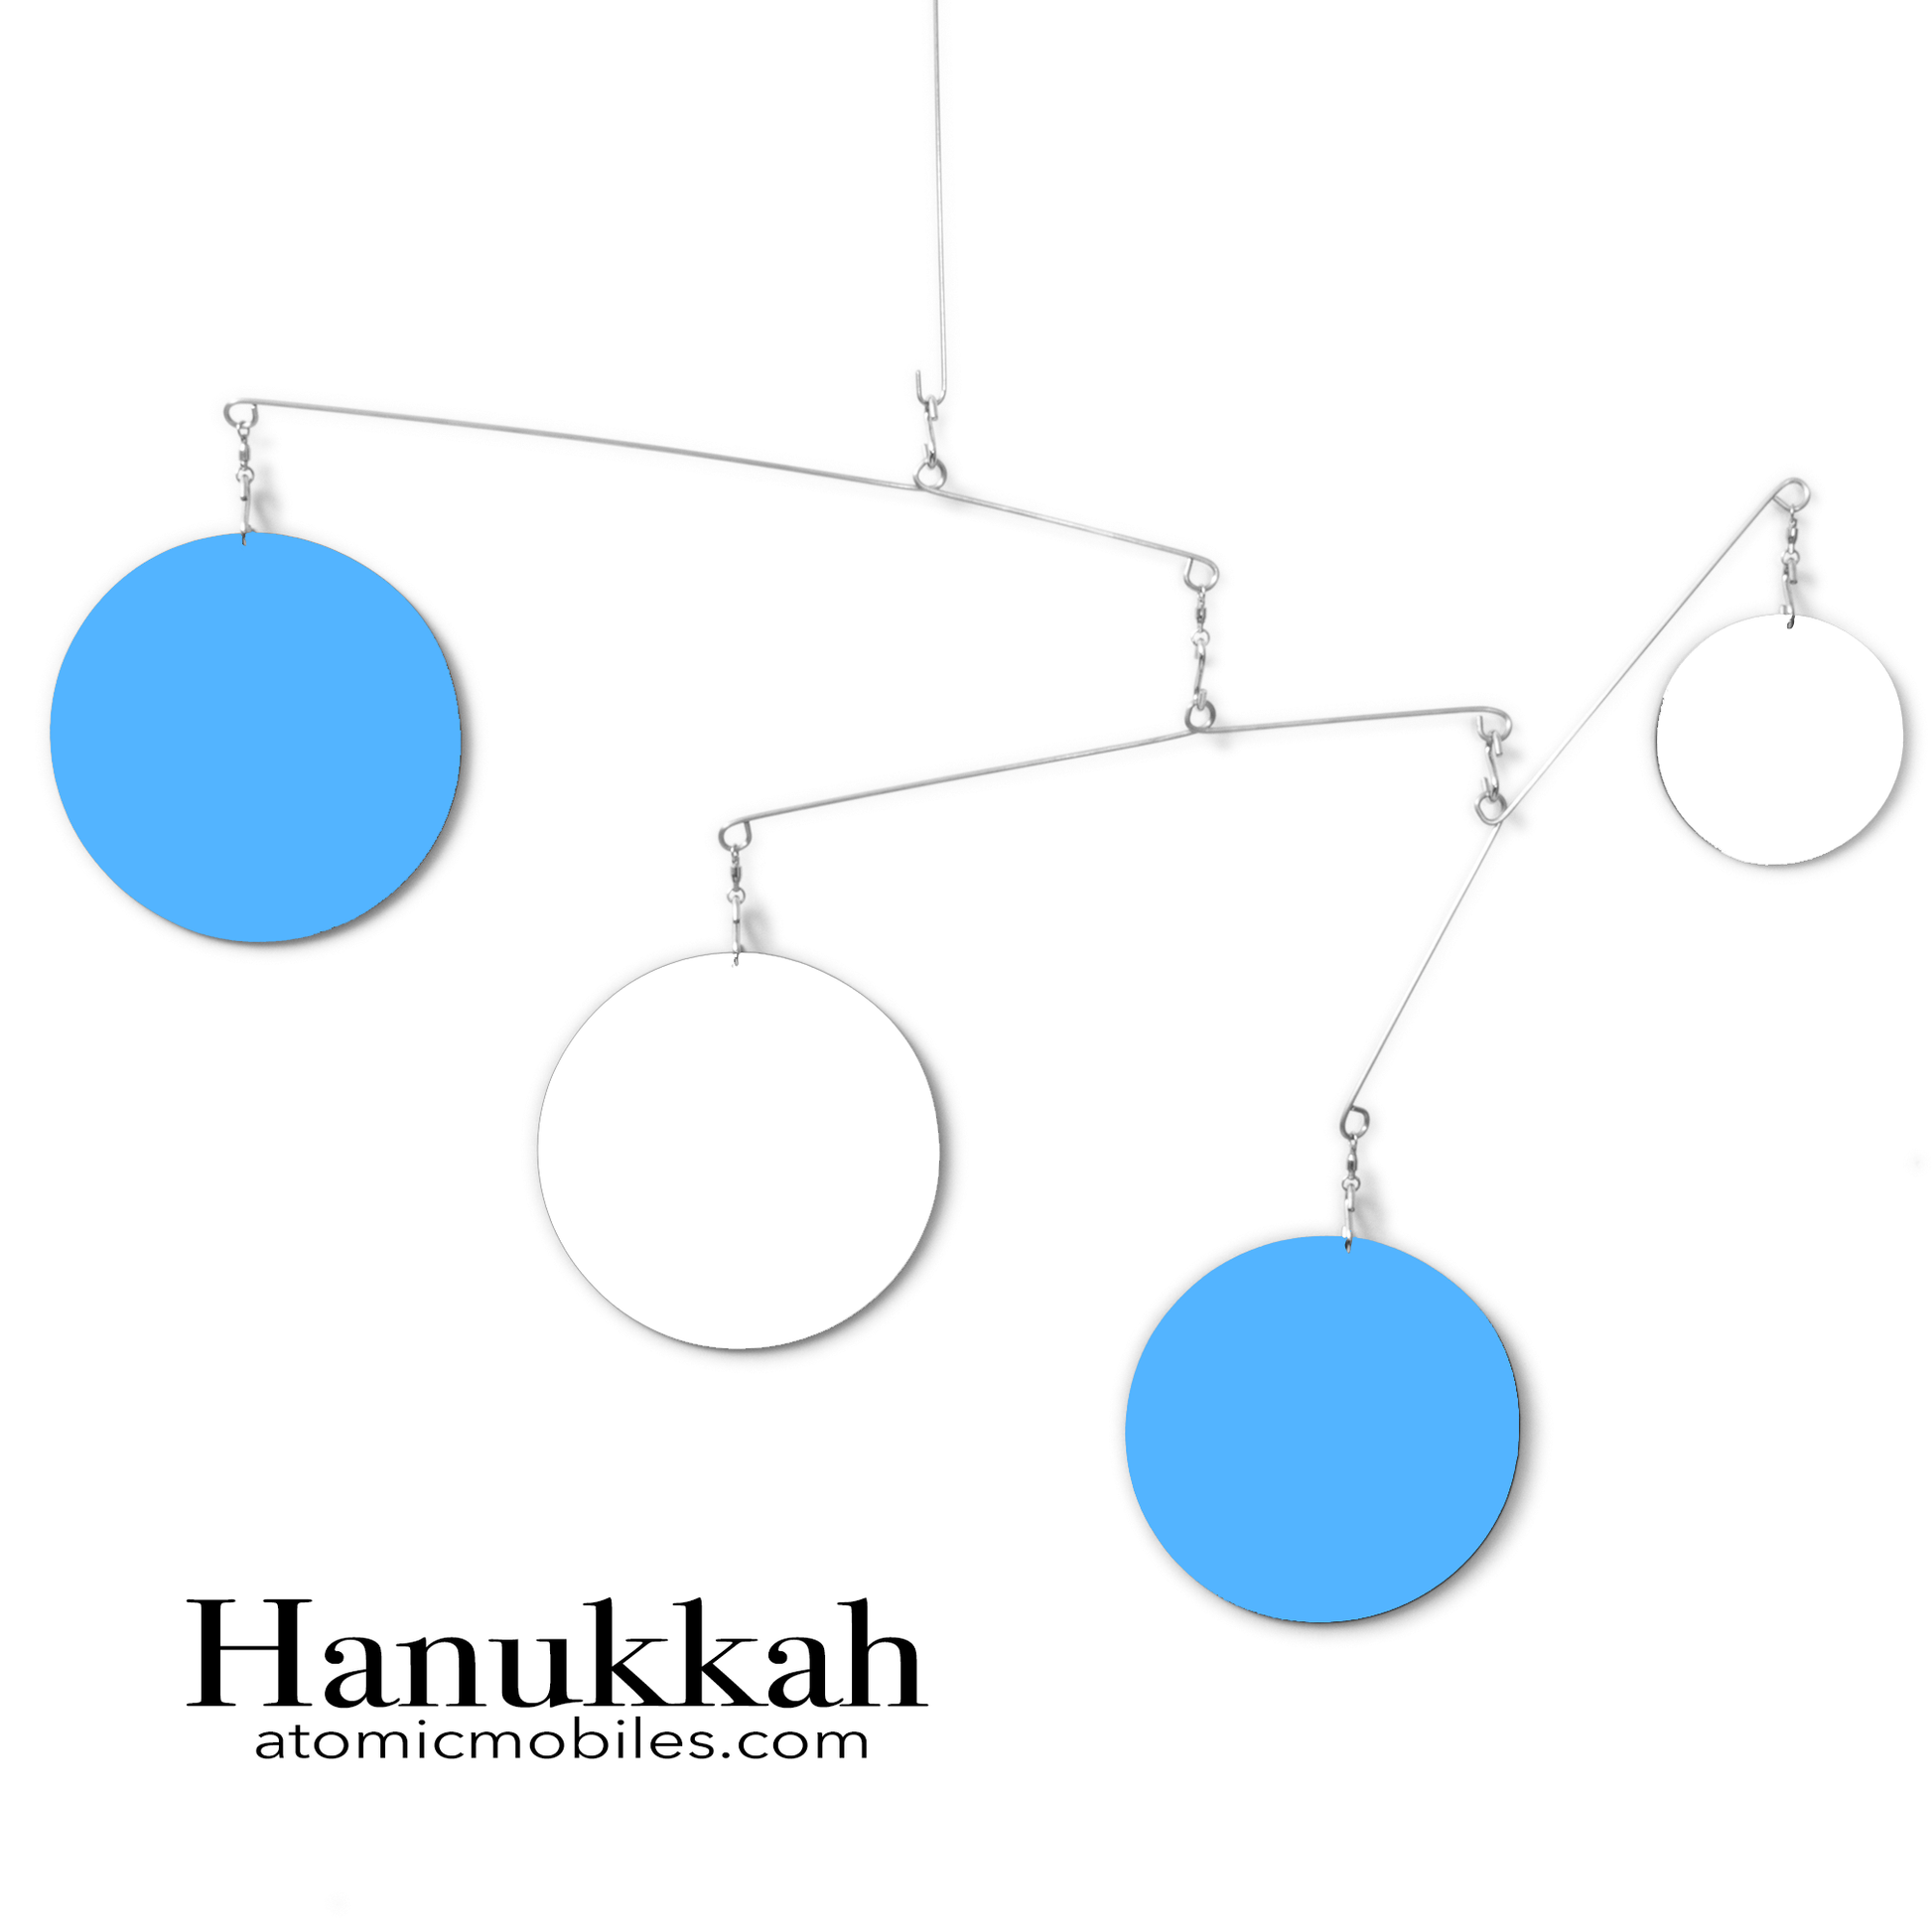 Unique Hanukkah Decoration - kinetic hanging art mobile in Hanukkah colors of Blue and White by AtomicMobiles.com